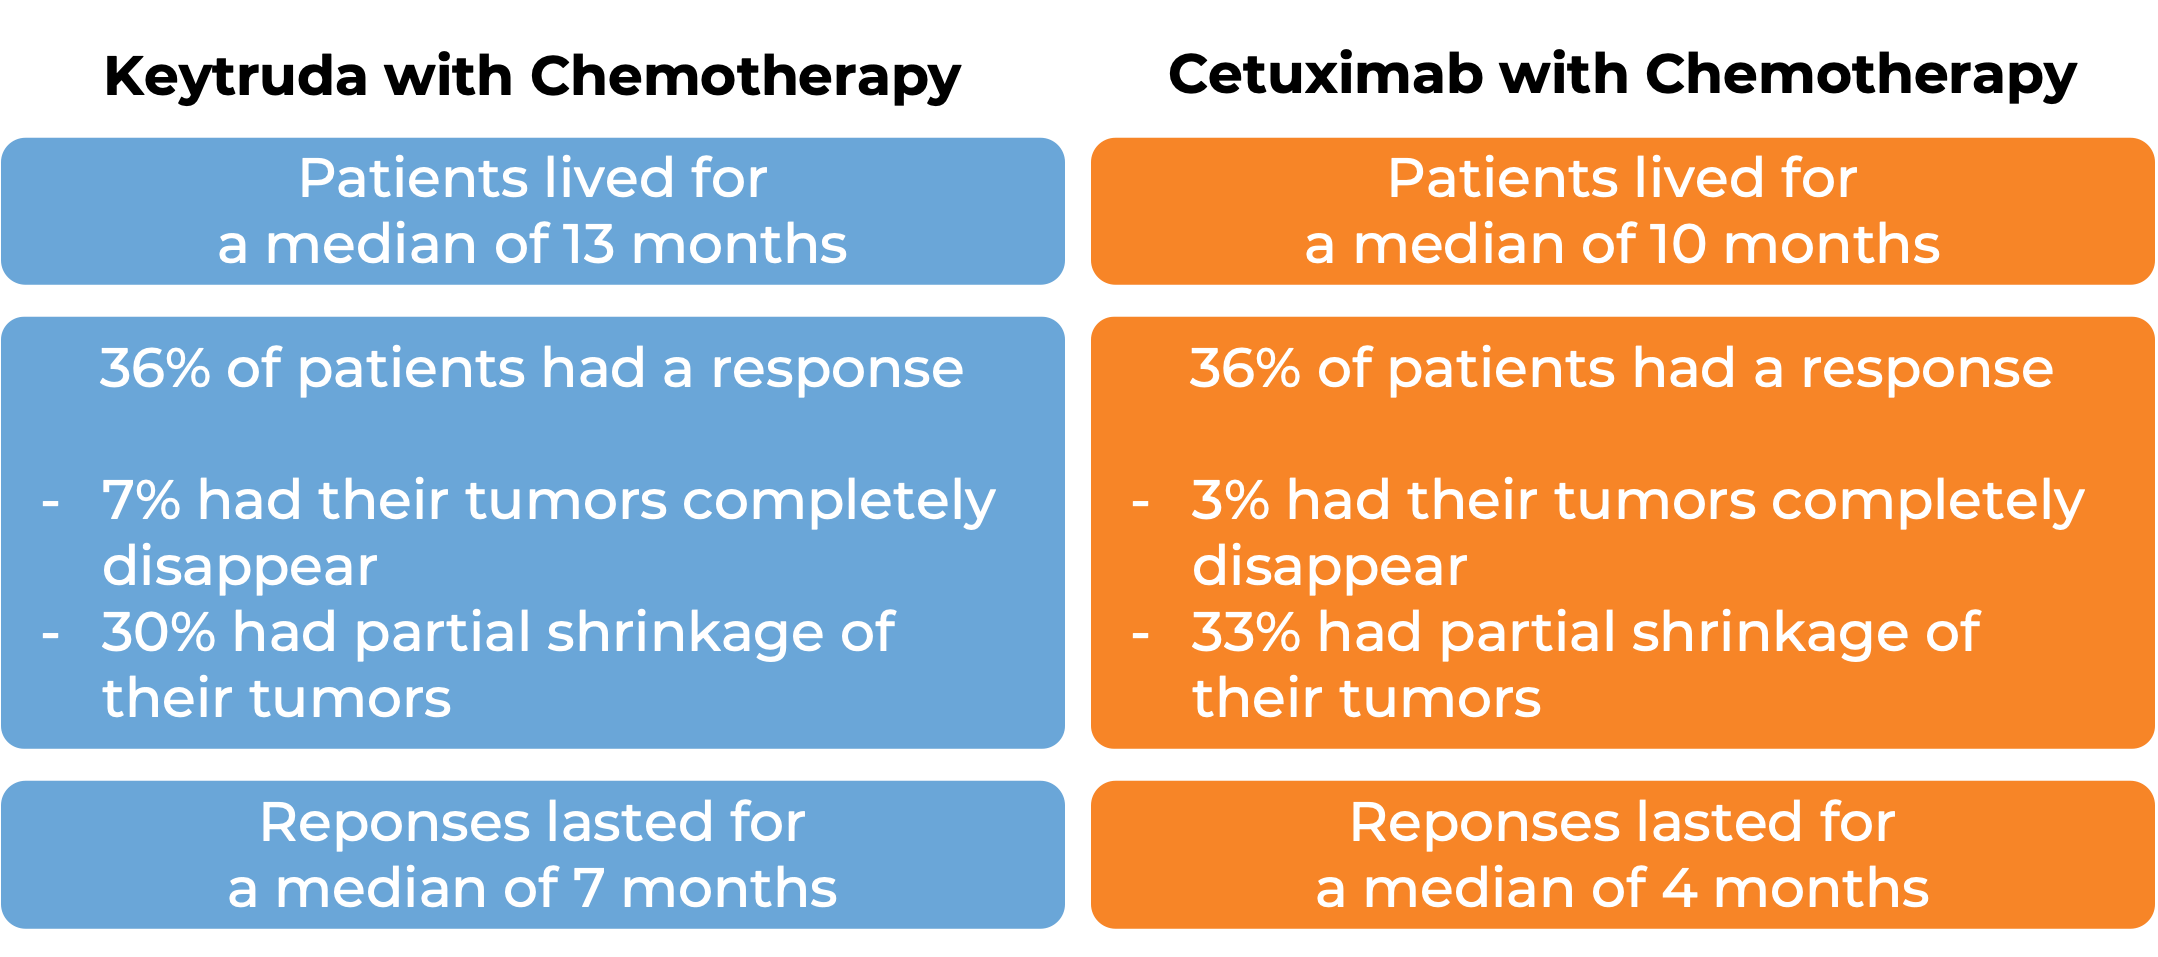 Results after treatment with Keytruda and chemotherapy vs cetuximab and chemotherapy (diagram)